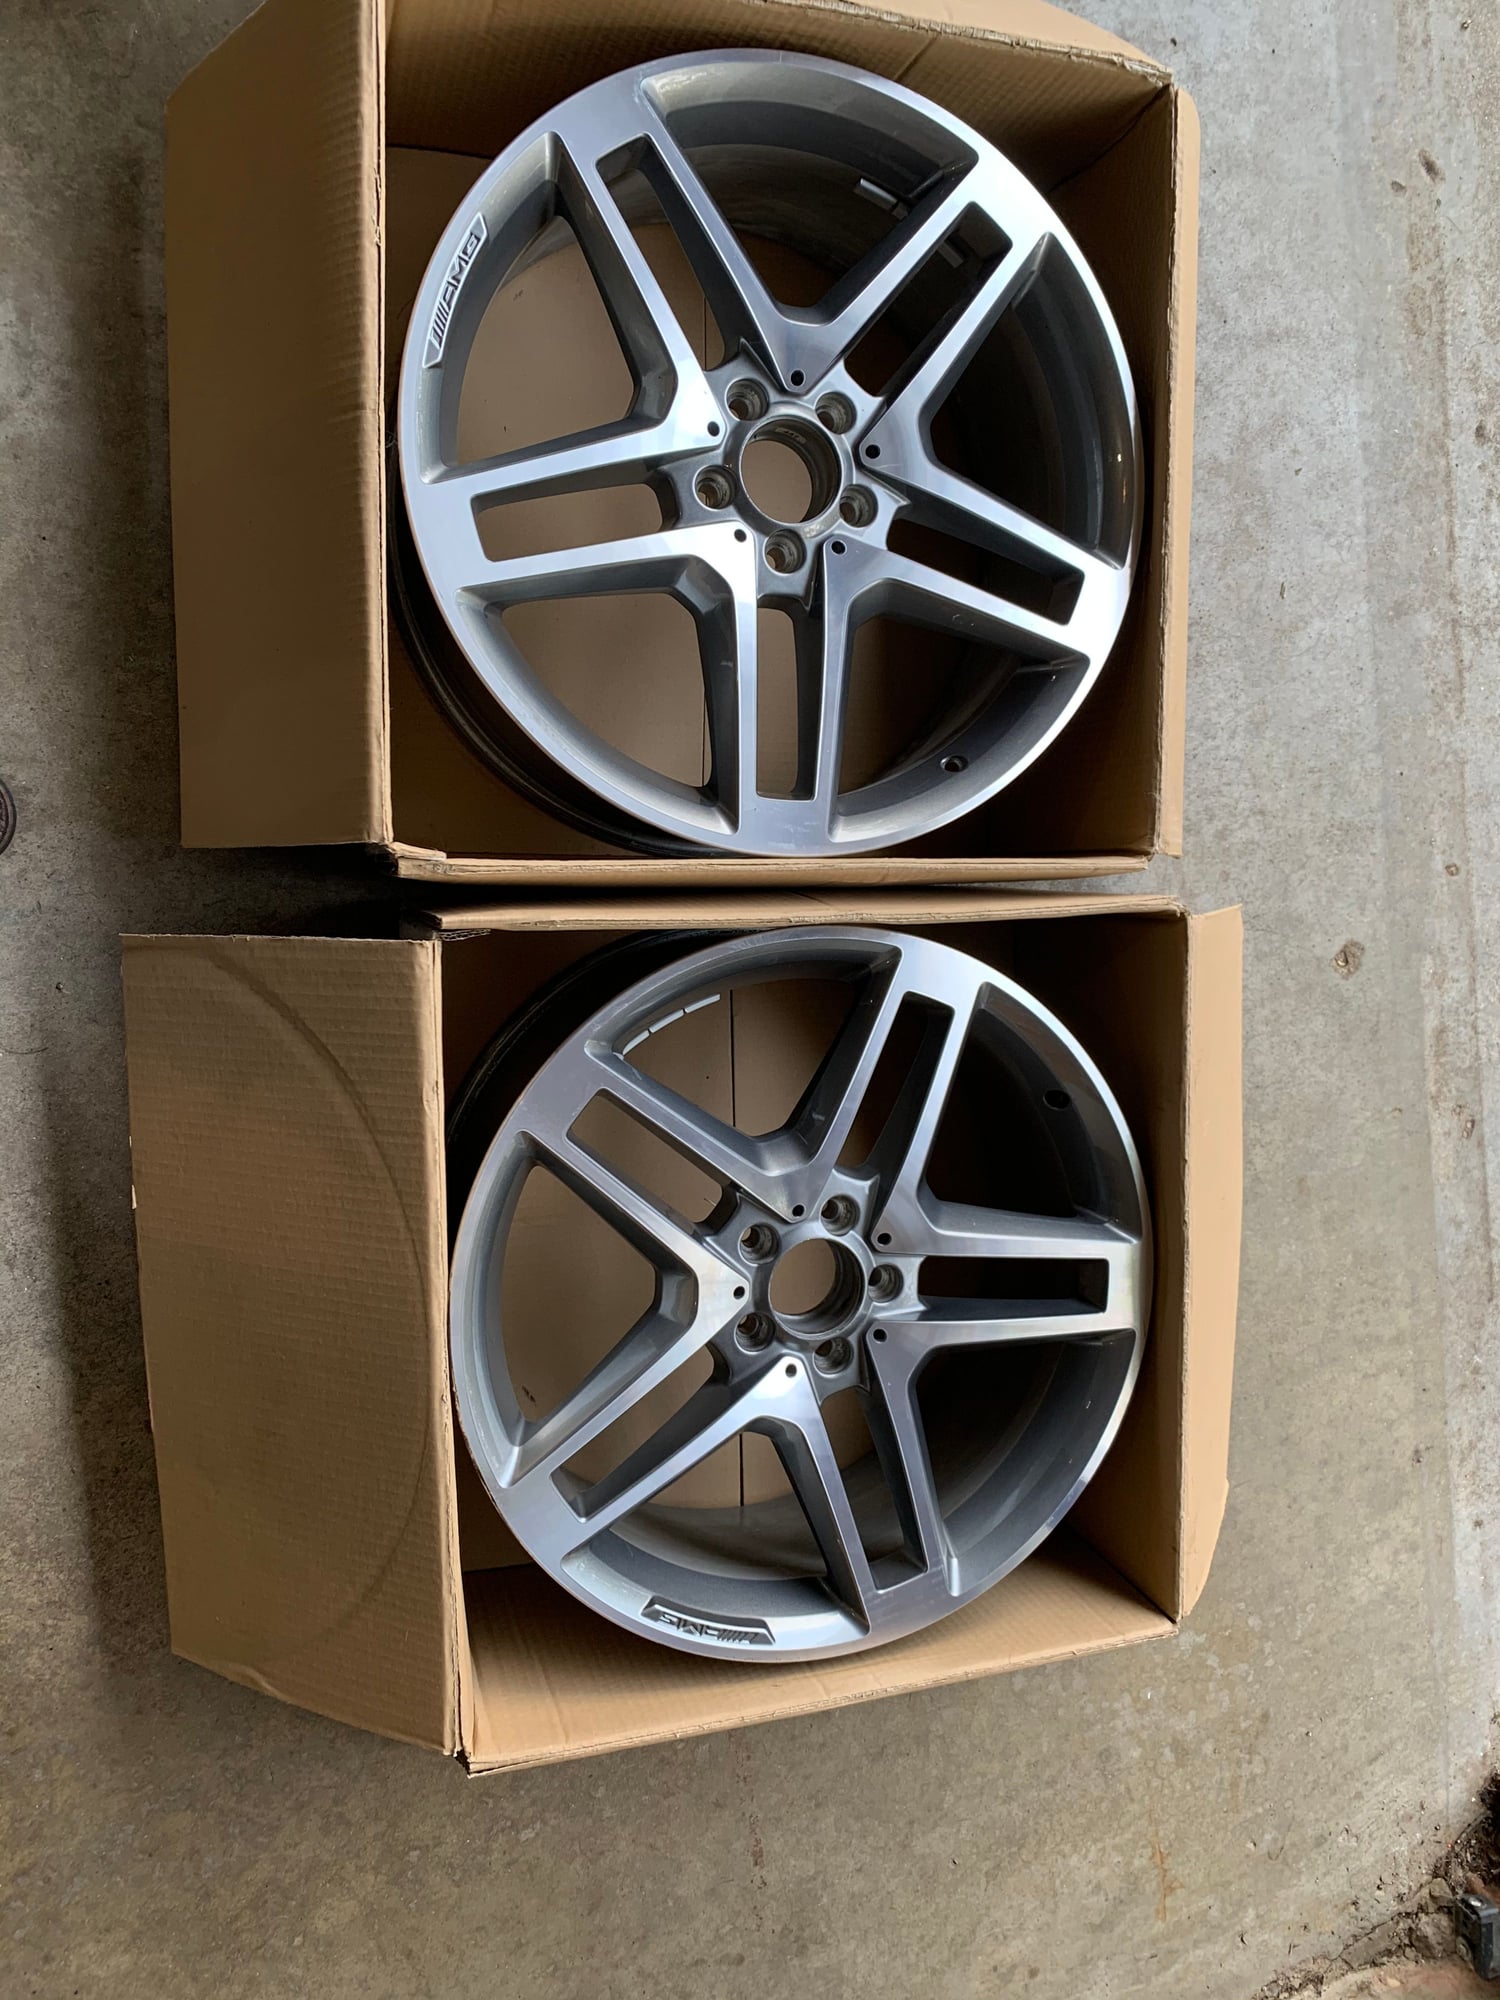 Wheels and Tires/Axles - 20" AMG GLK350 wheels x (2) Chicagoland $200 FTF - Used - 2010 to 2015 Mercedes-Benz GLK350 - St Charles, IL 60175, United States